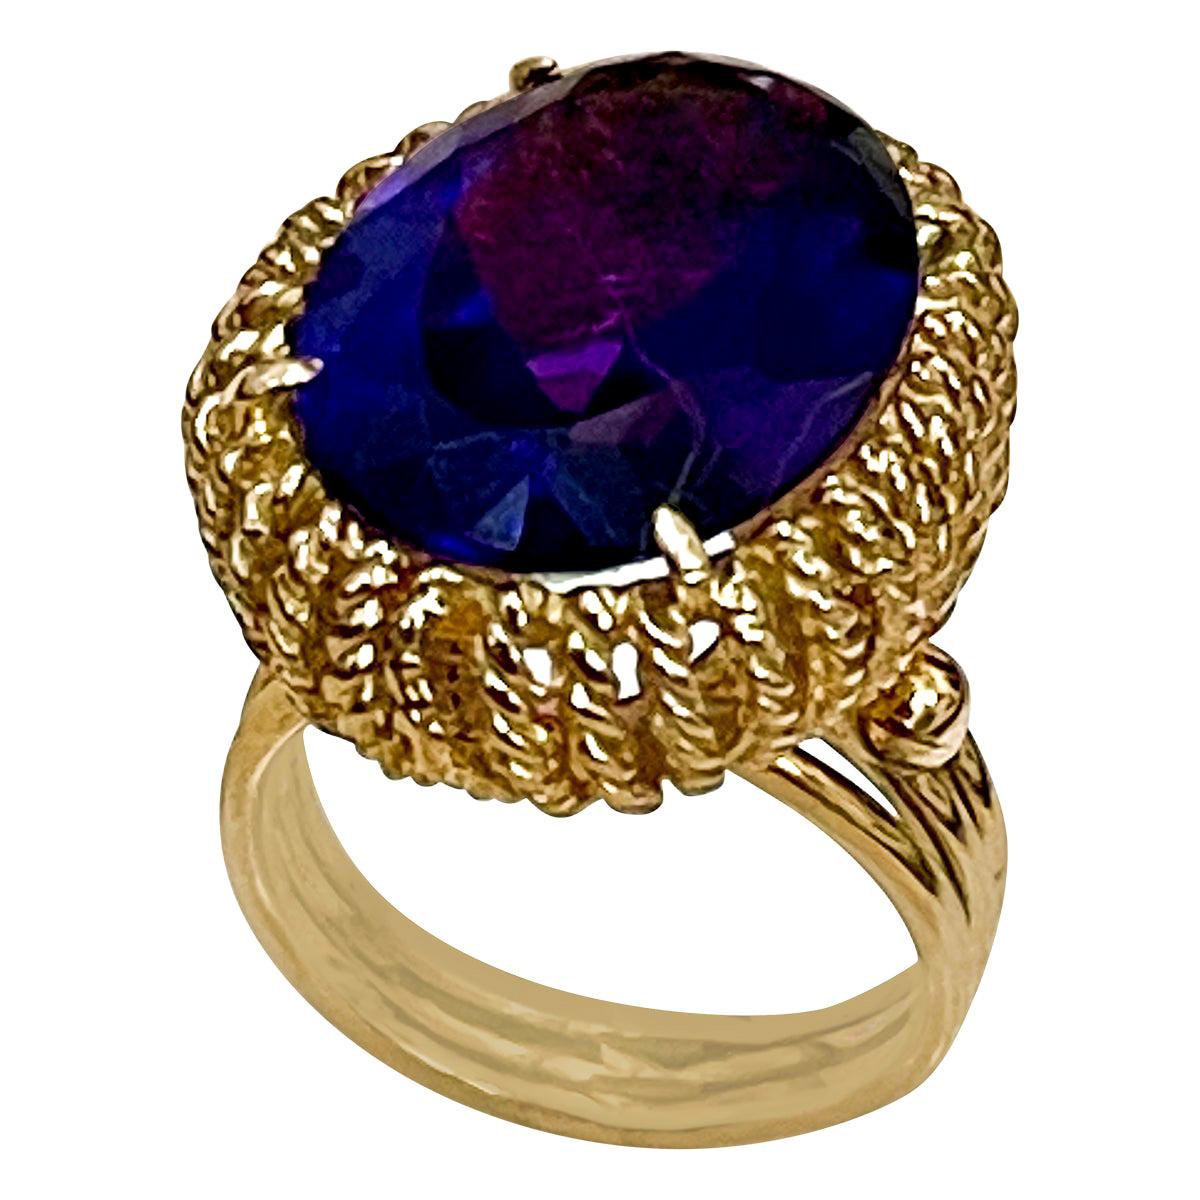 13 Carat Natural Oval Amethyst Cocktail Ring in 18 Karat Yellow Gold, Estate For Sale